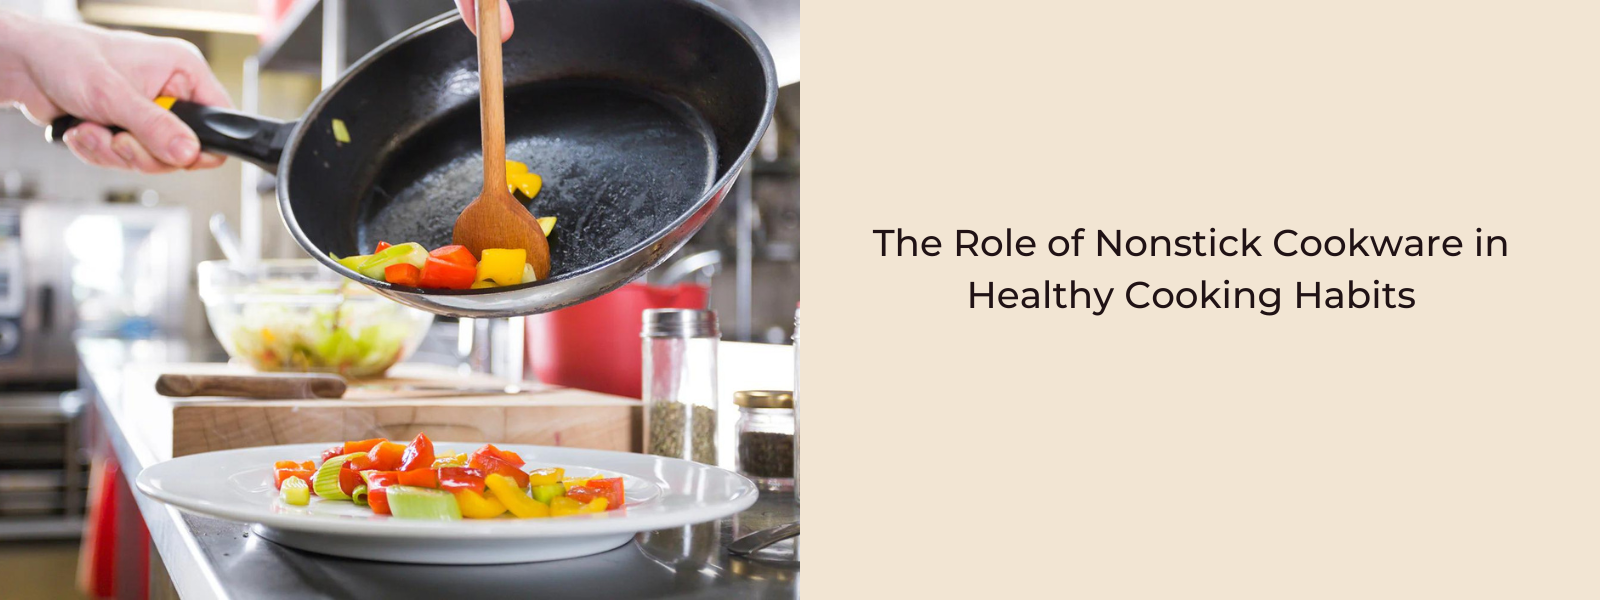 The Role of Nonstick Cookware in Healthy Cooking Habits